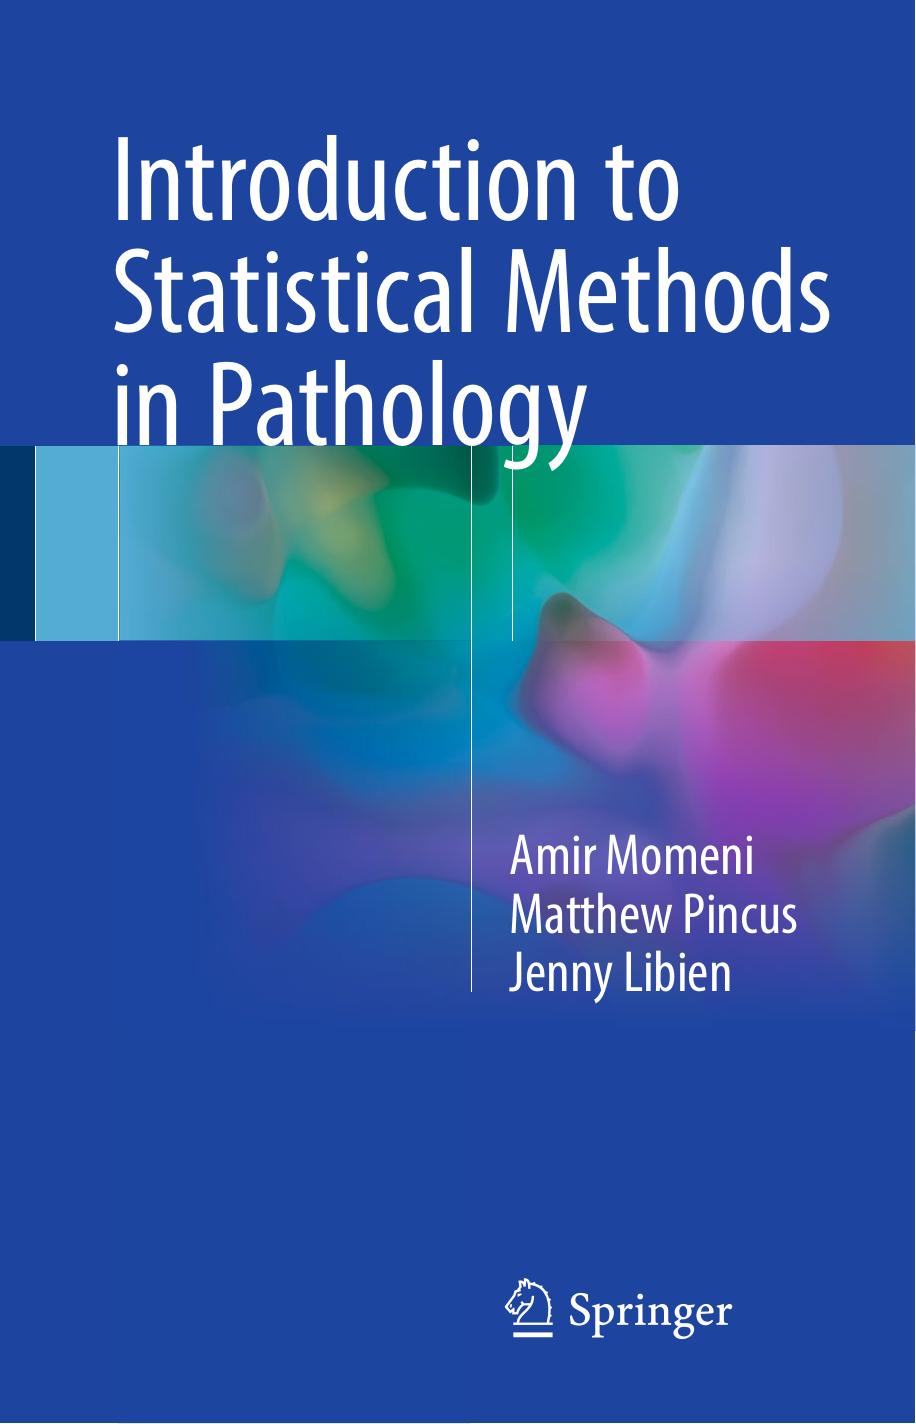 Introduction to statistical methods in pathology 2018.pdf